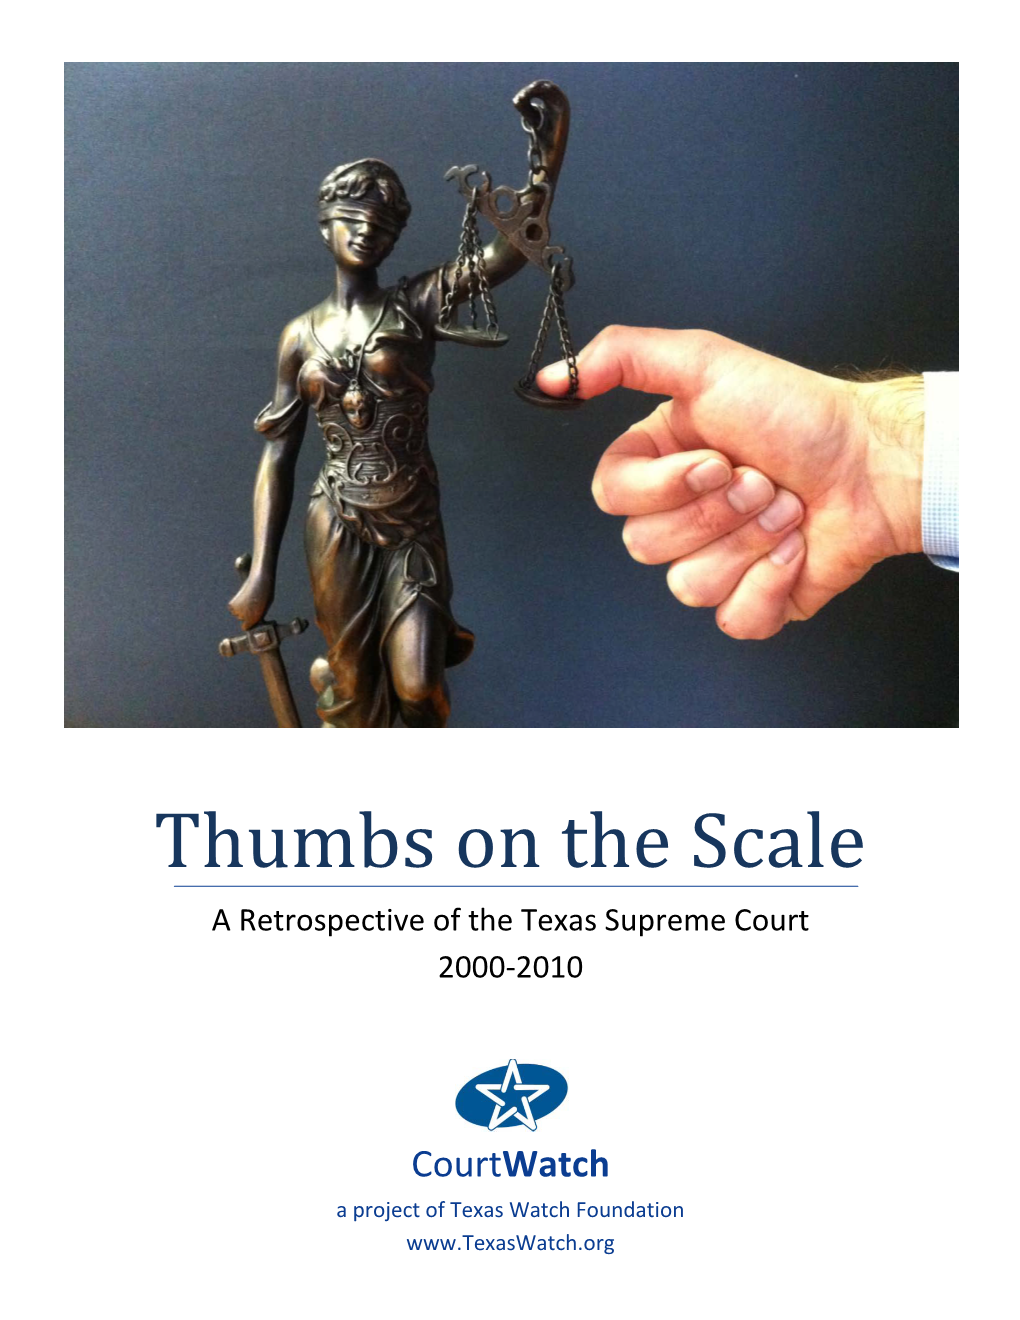 Thumbs on the Scale a Retrospective of the Texas Supreme Court 2000-2010